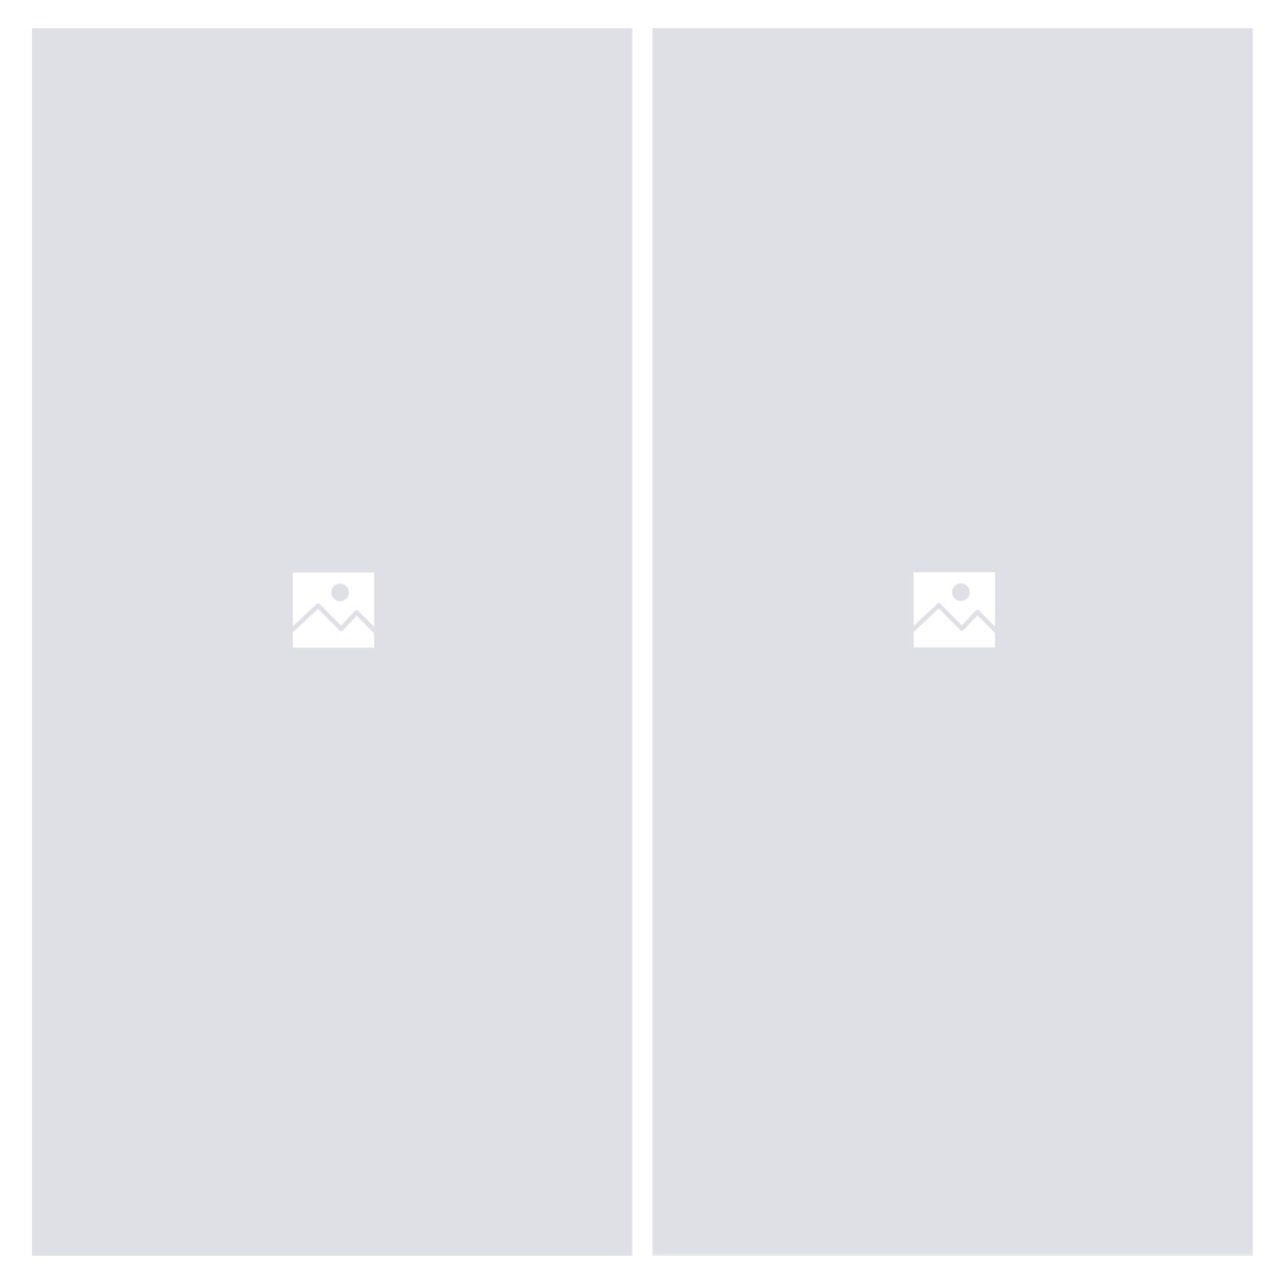 Two Open Doors With A White Envelope In The Middle Layouts Template